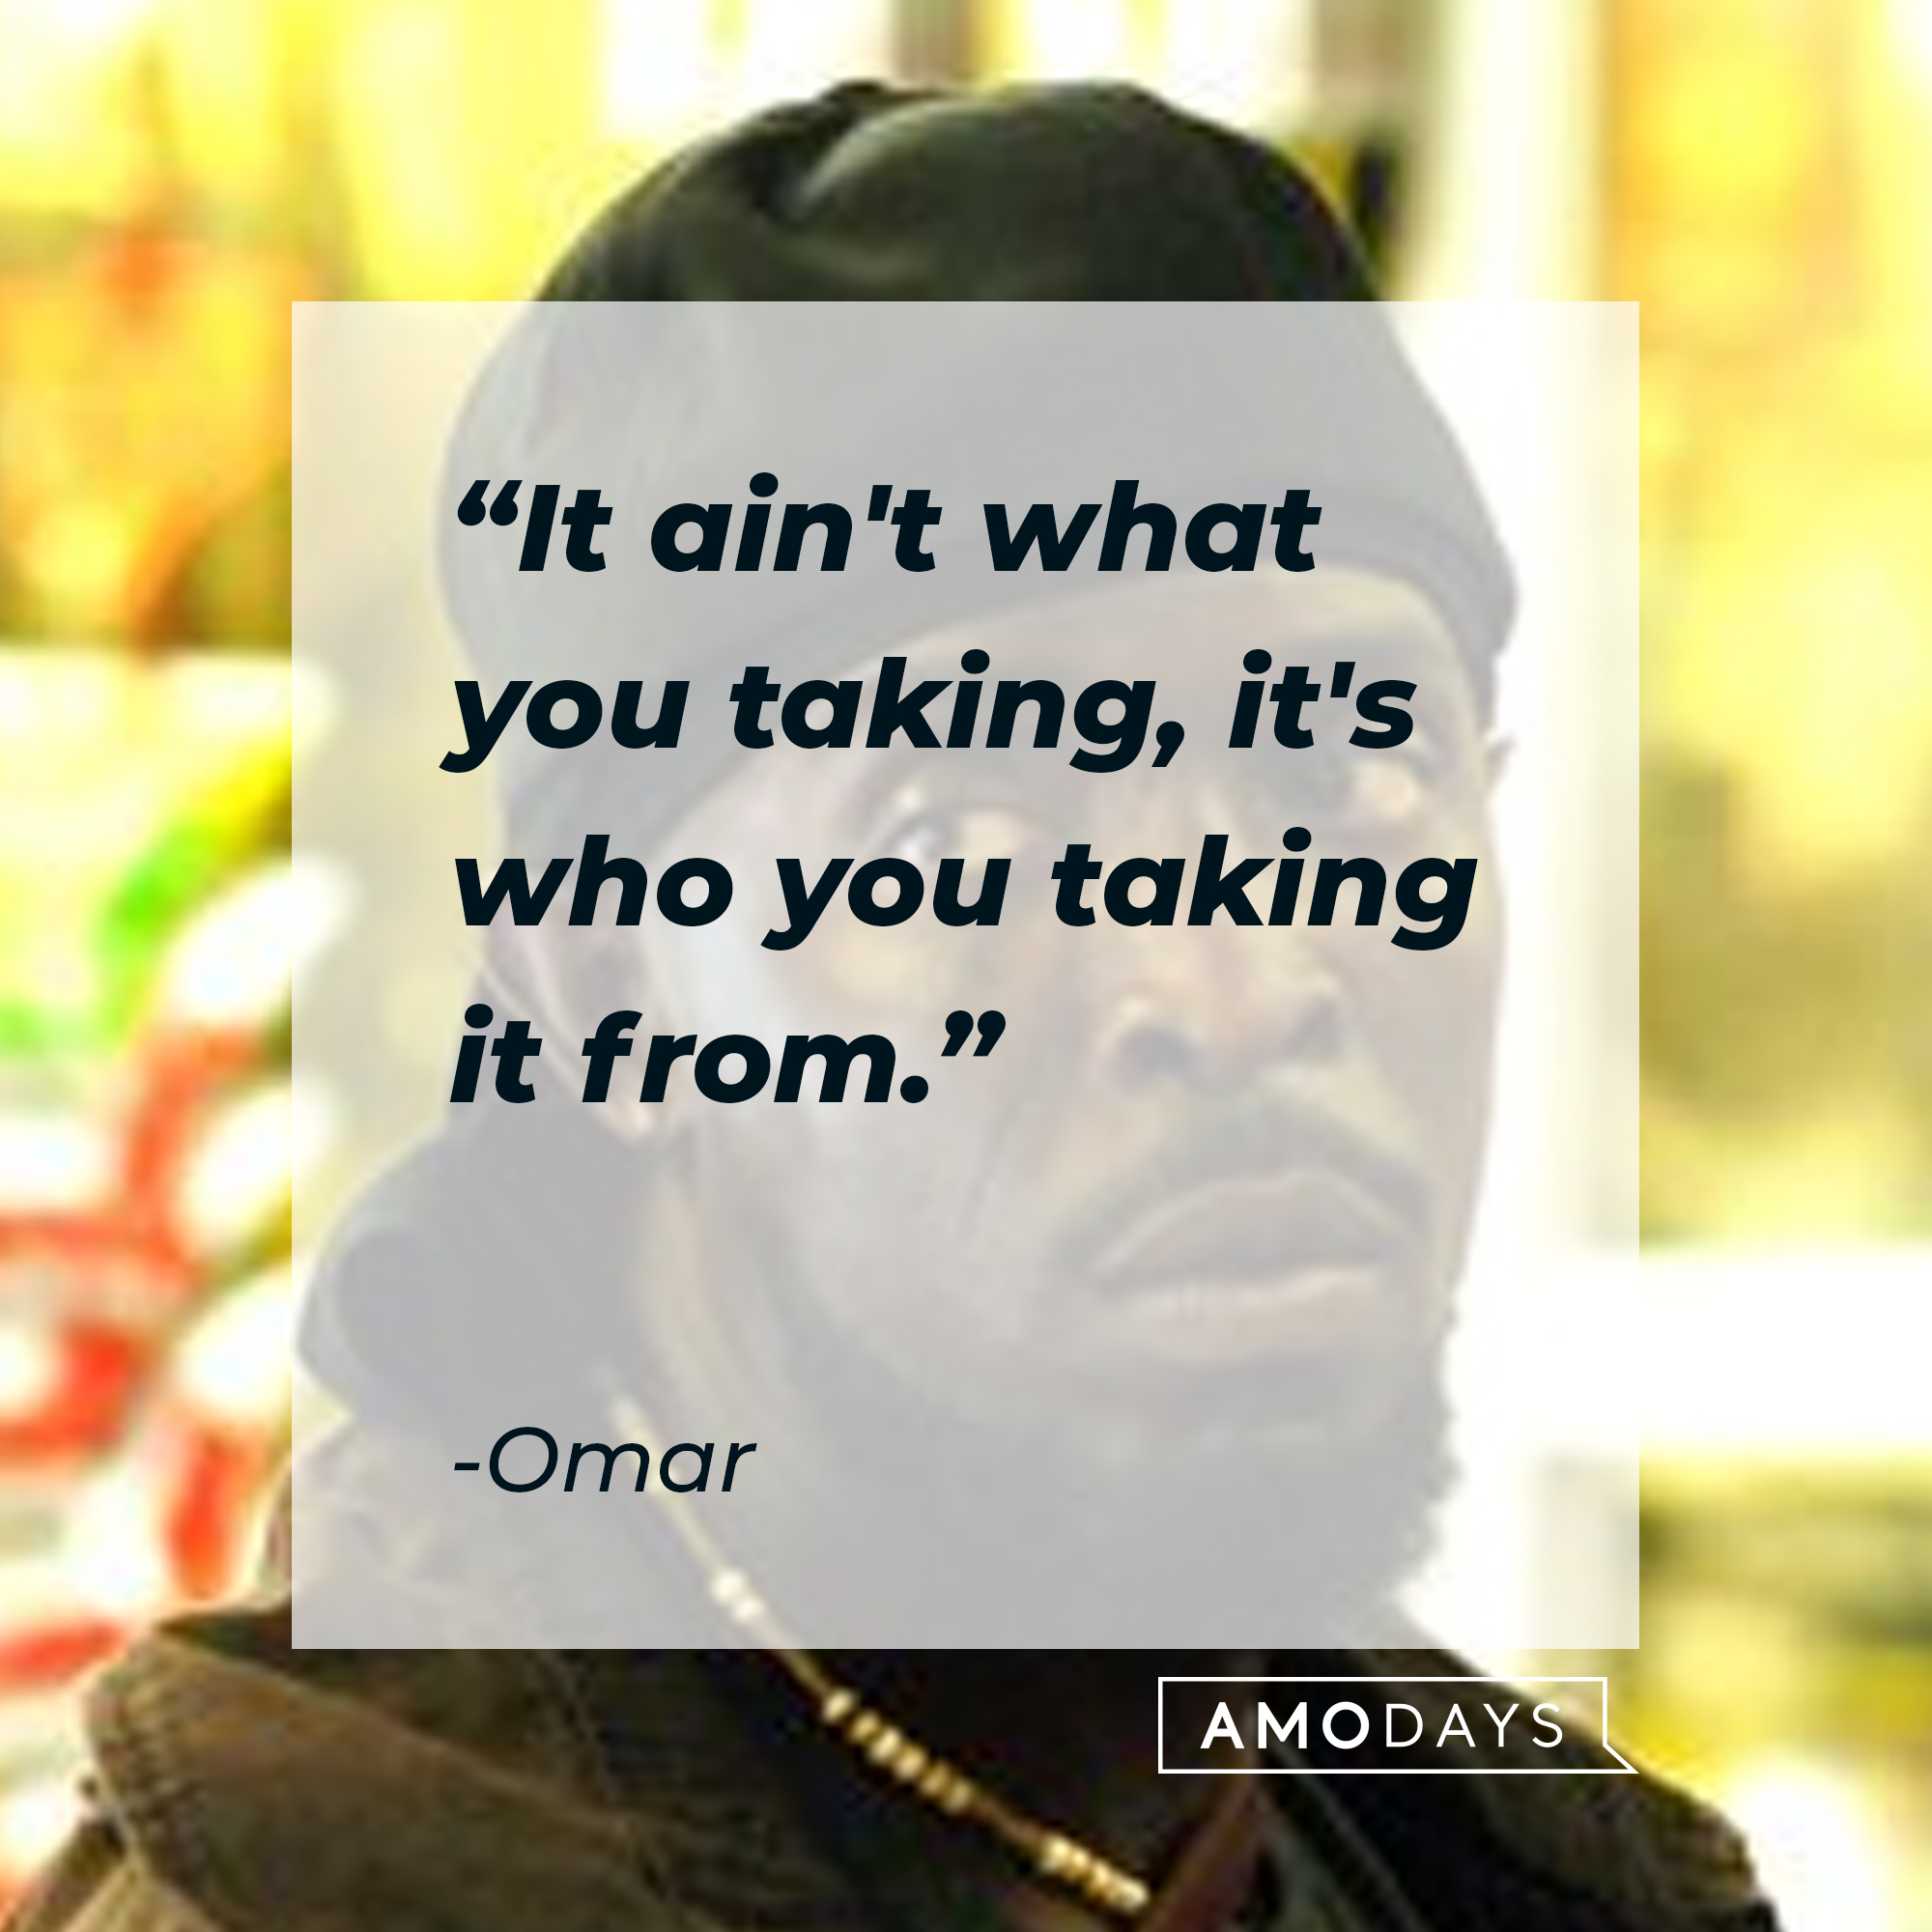 Omar's quote: "It ain't what you taking, it's who you taking it from." | Source: facebook.com/TheWire